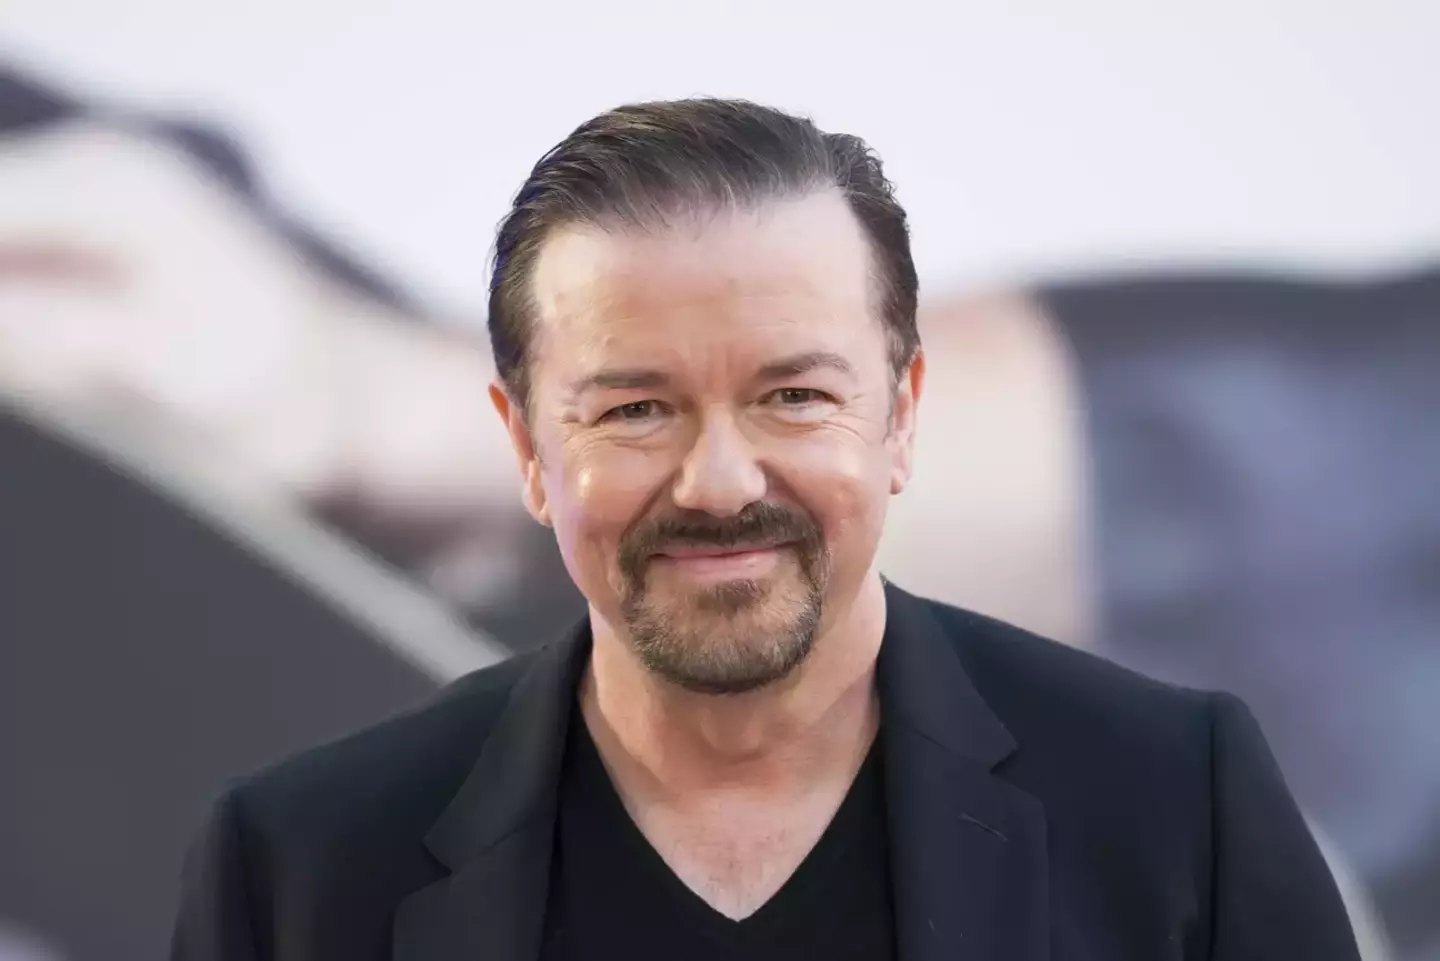 Gervais has raked in a fortune for a single stand-up comedy gig.